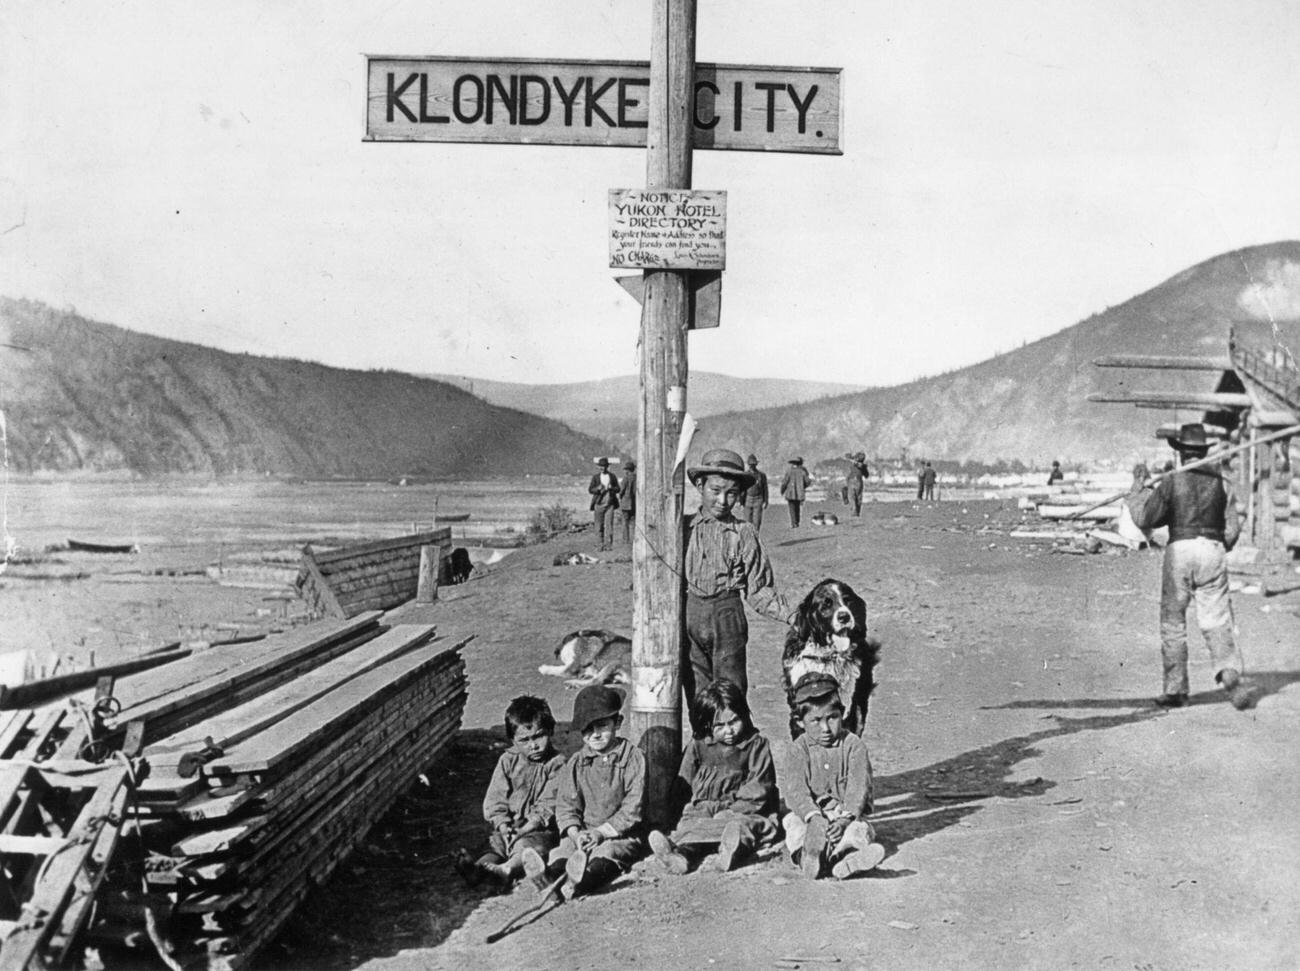 Children with their dog by a street sign in the Klondike area, Yukon Territory, Canada, 1890.